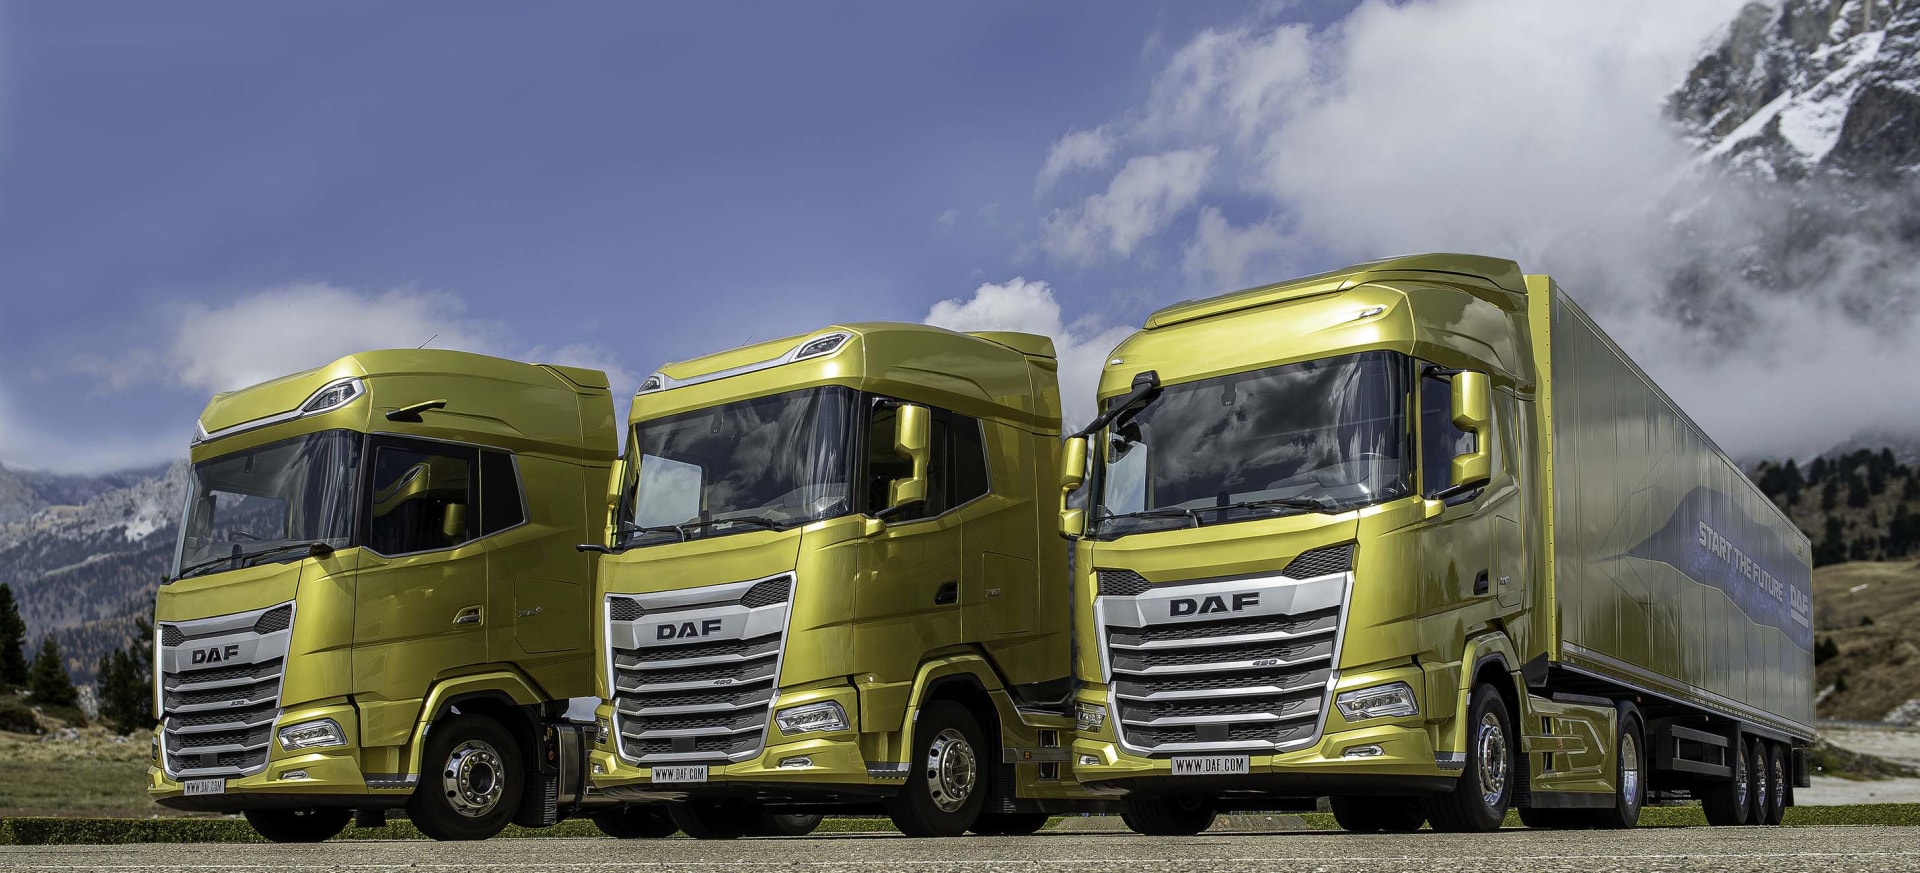 The New Generation DAF